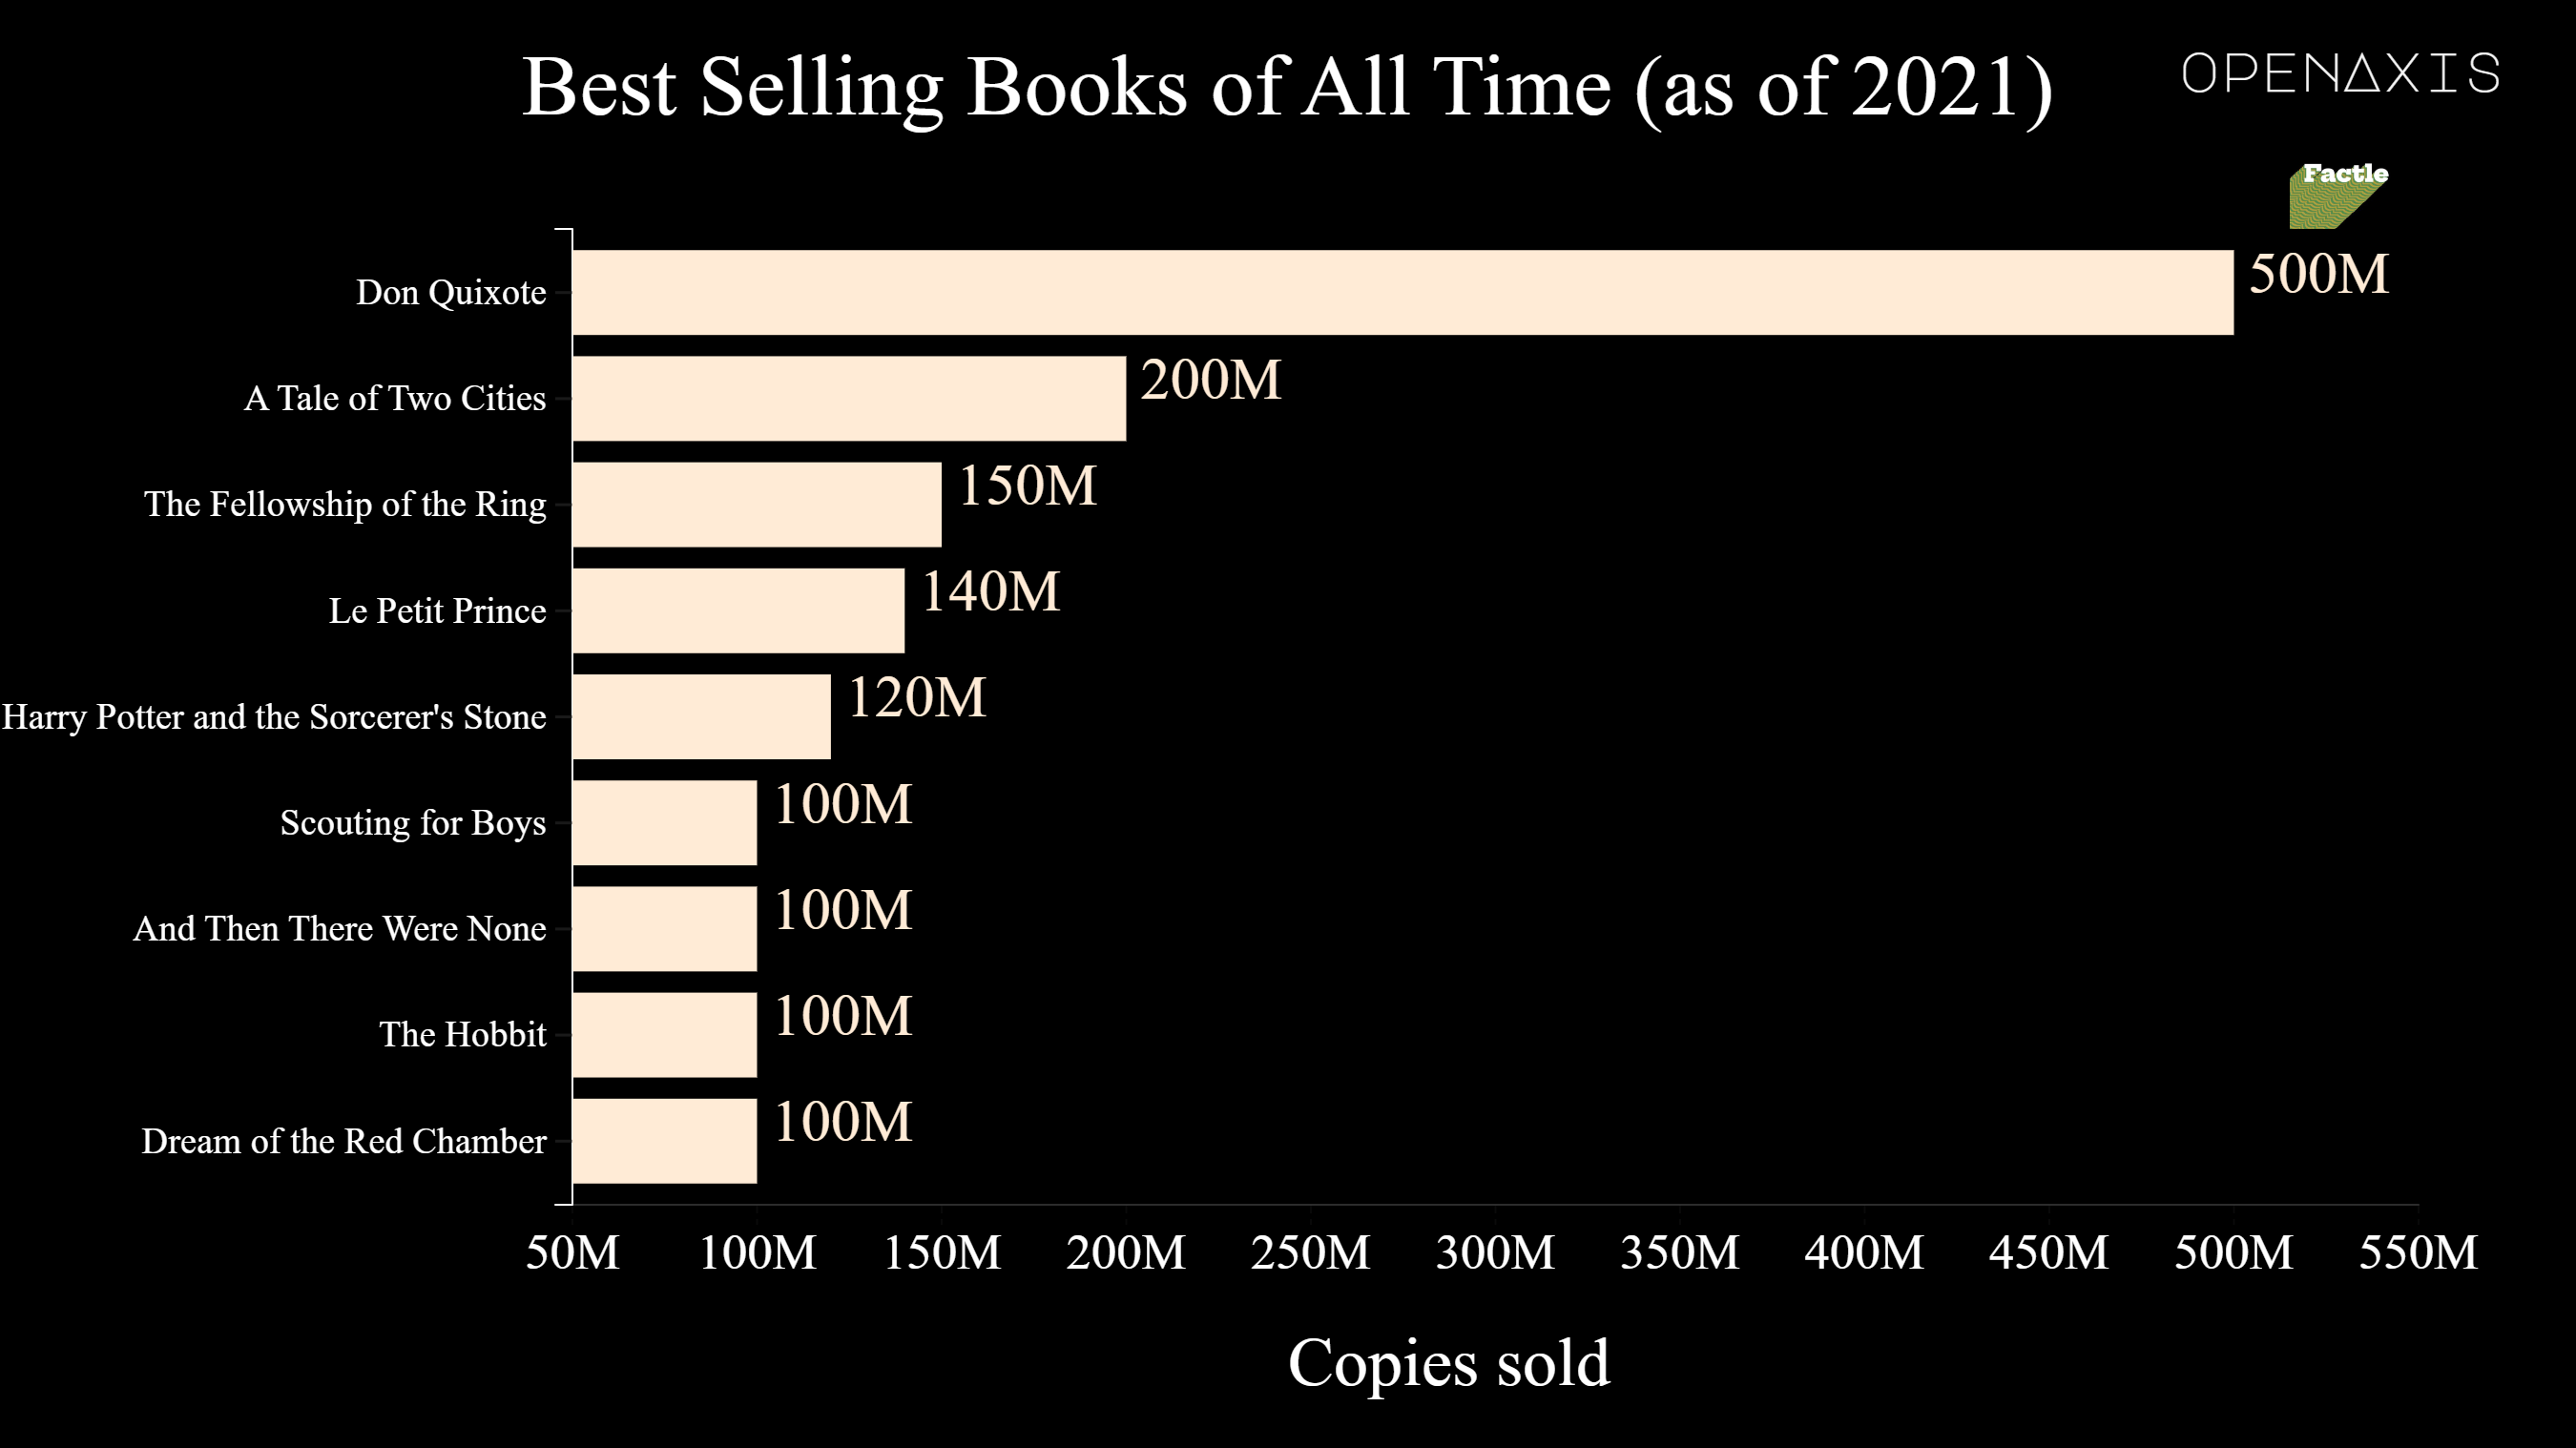 Best selling books of all time (As of 2021) Dataset on OpenAxis